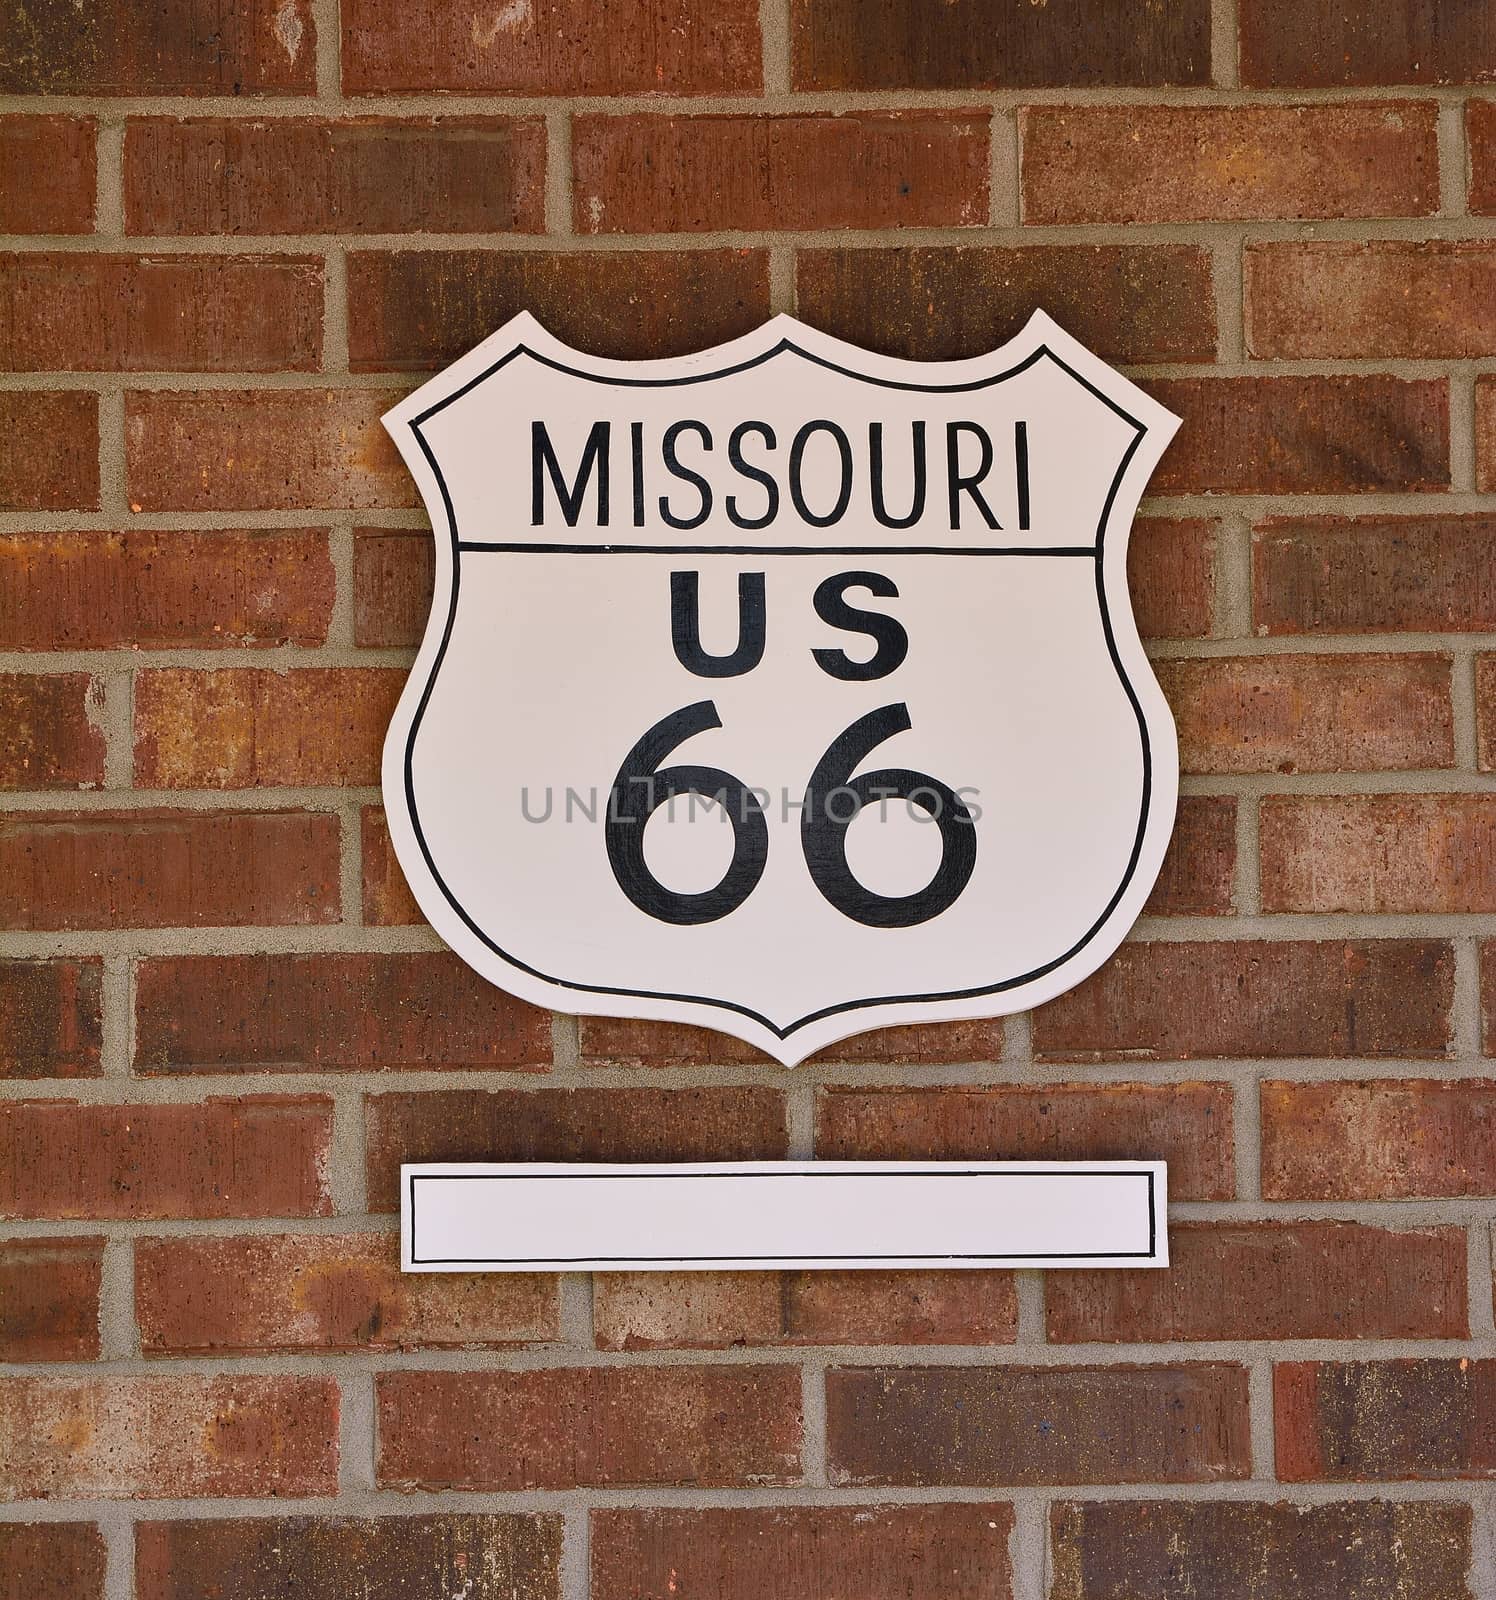 Route 66 sign in Missouri. by CreativePhotoSpain